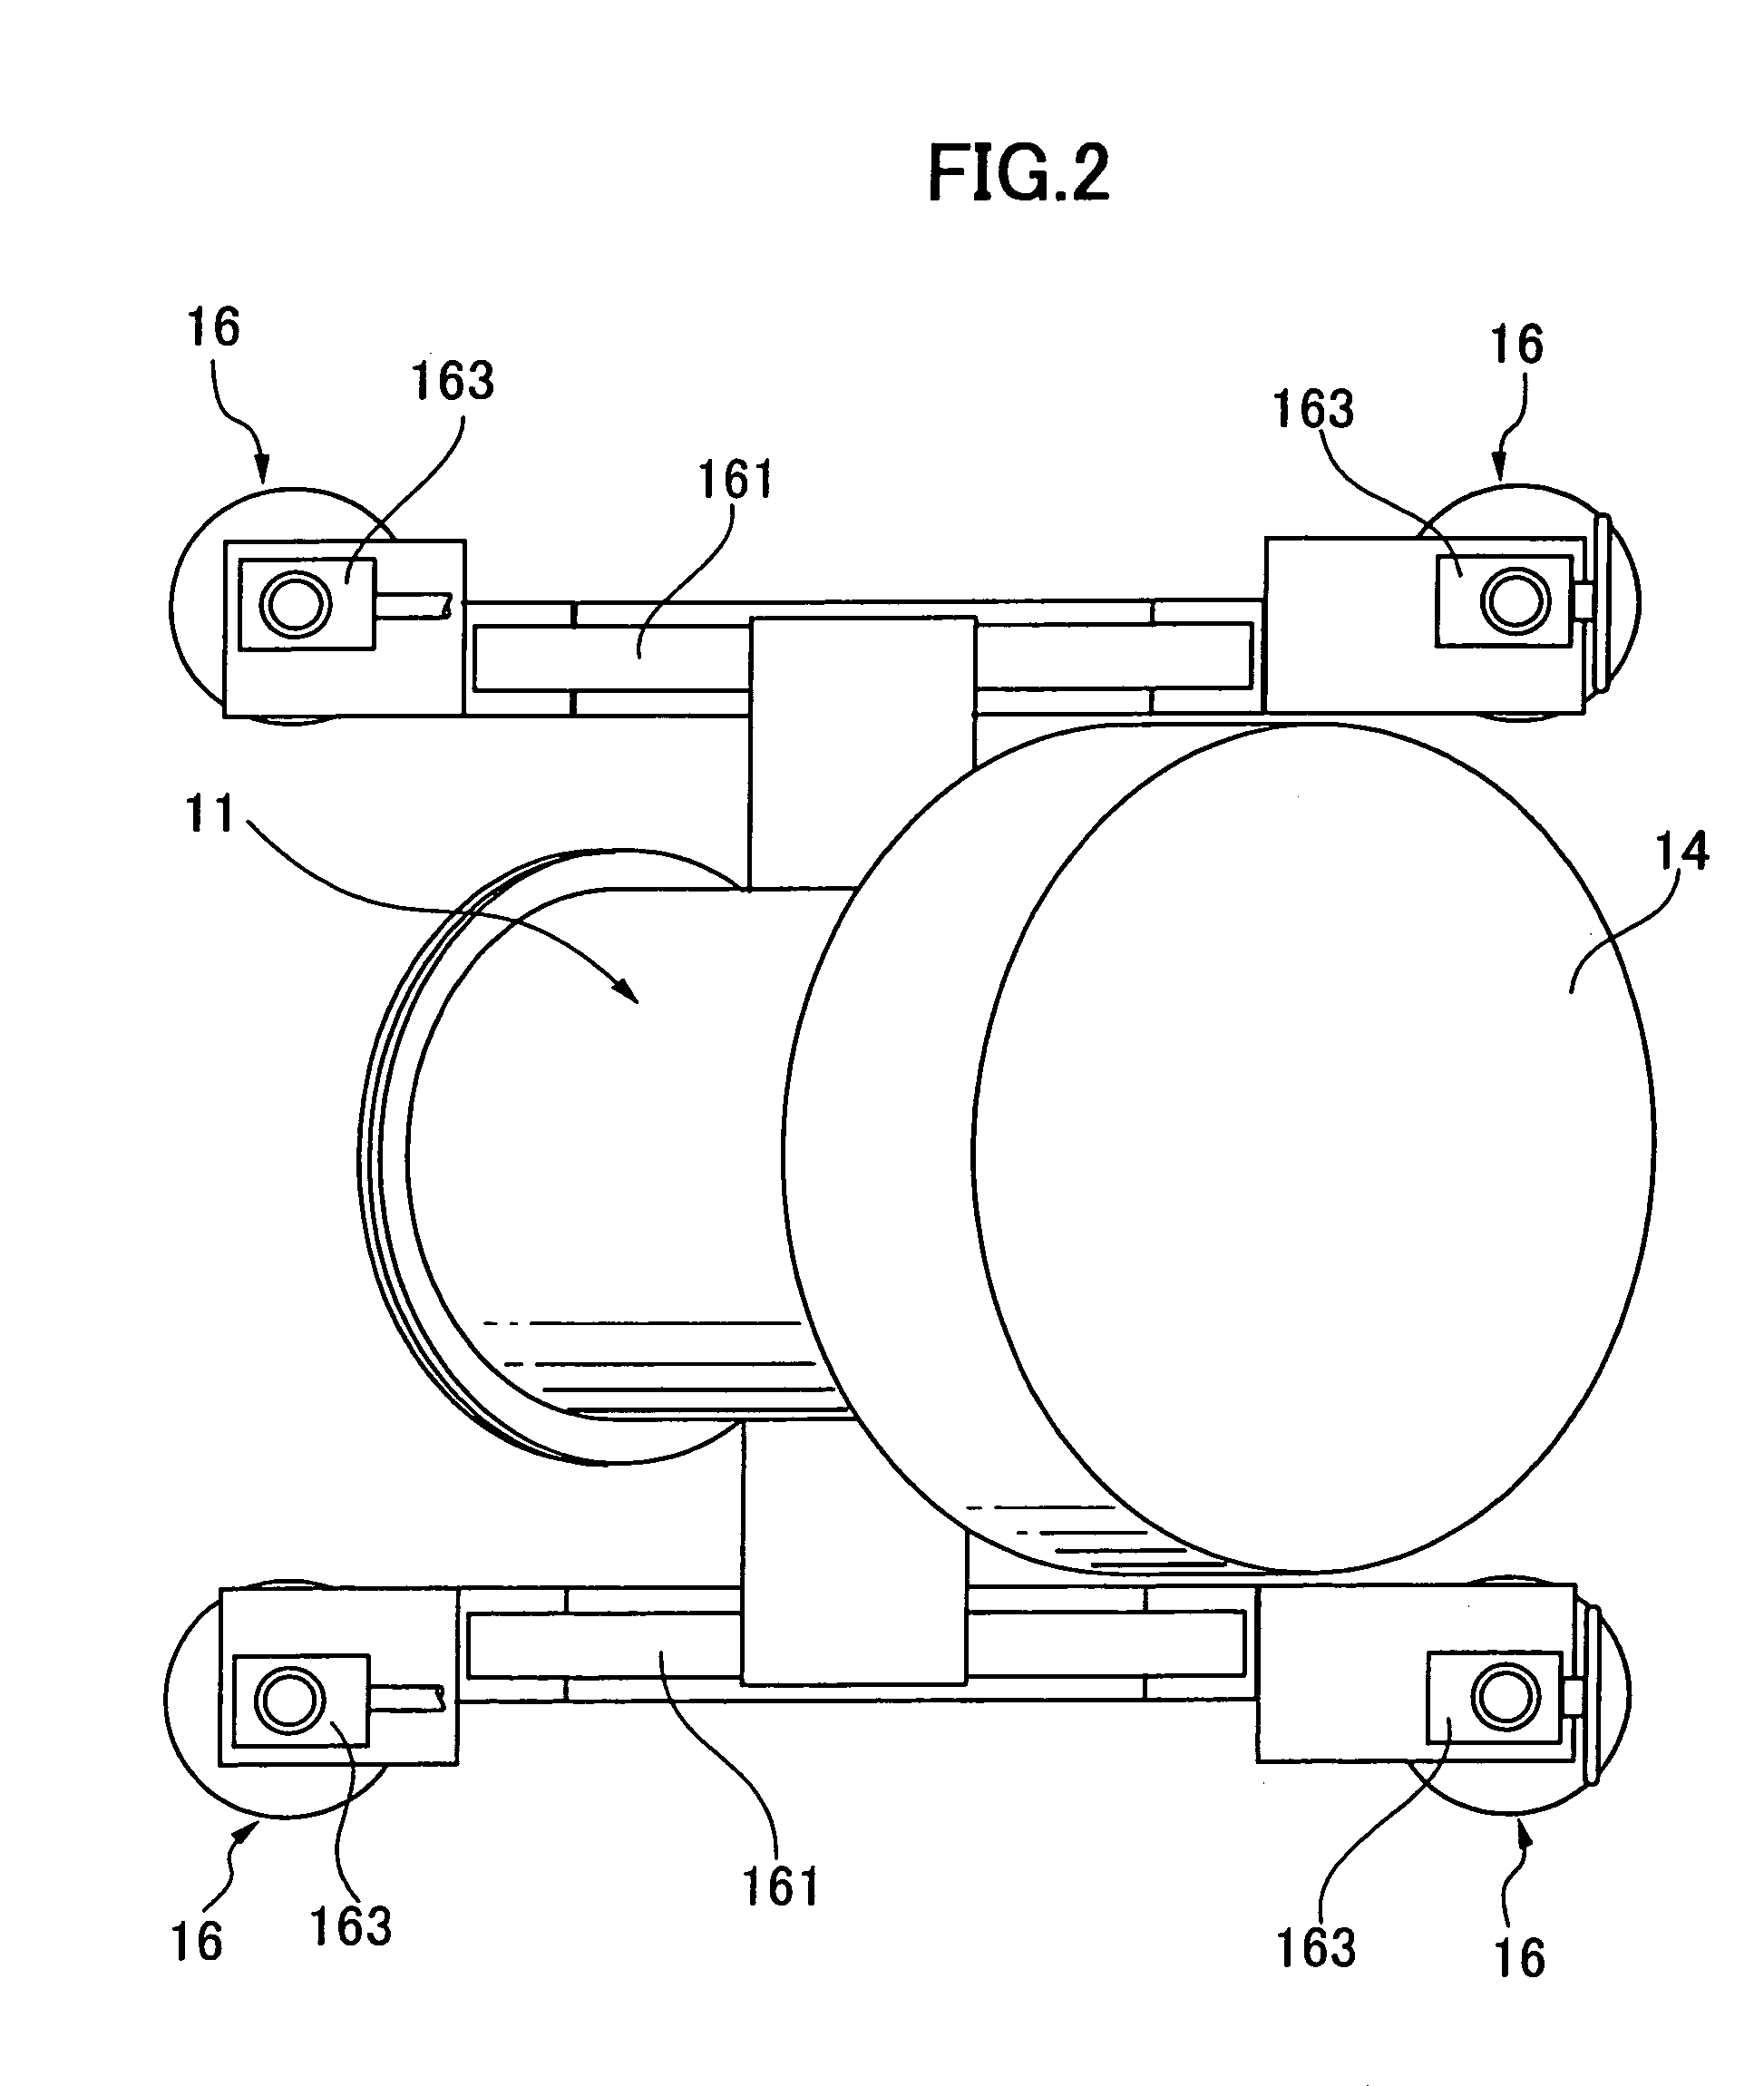 Apparatus for measuring the neuro-magnetic field from a human brain and method for operating the same